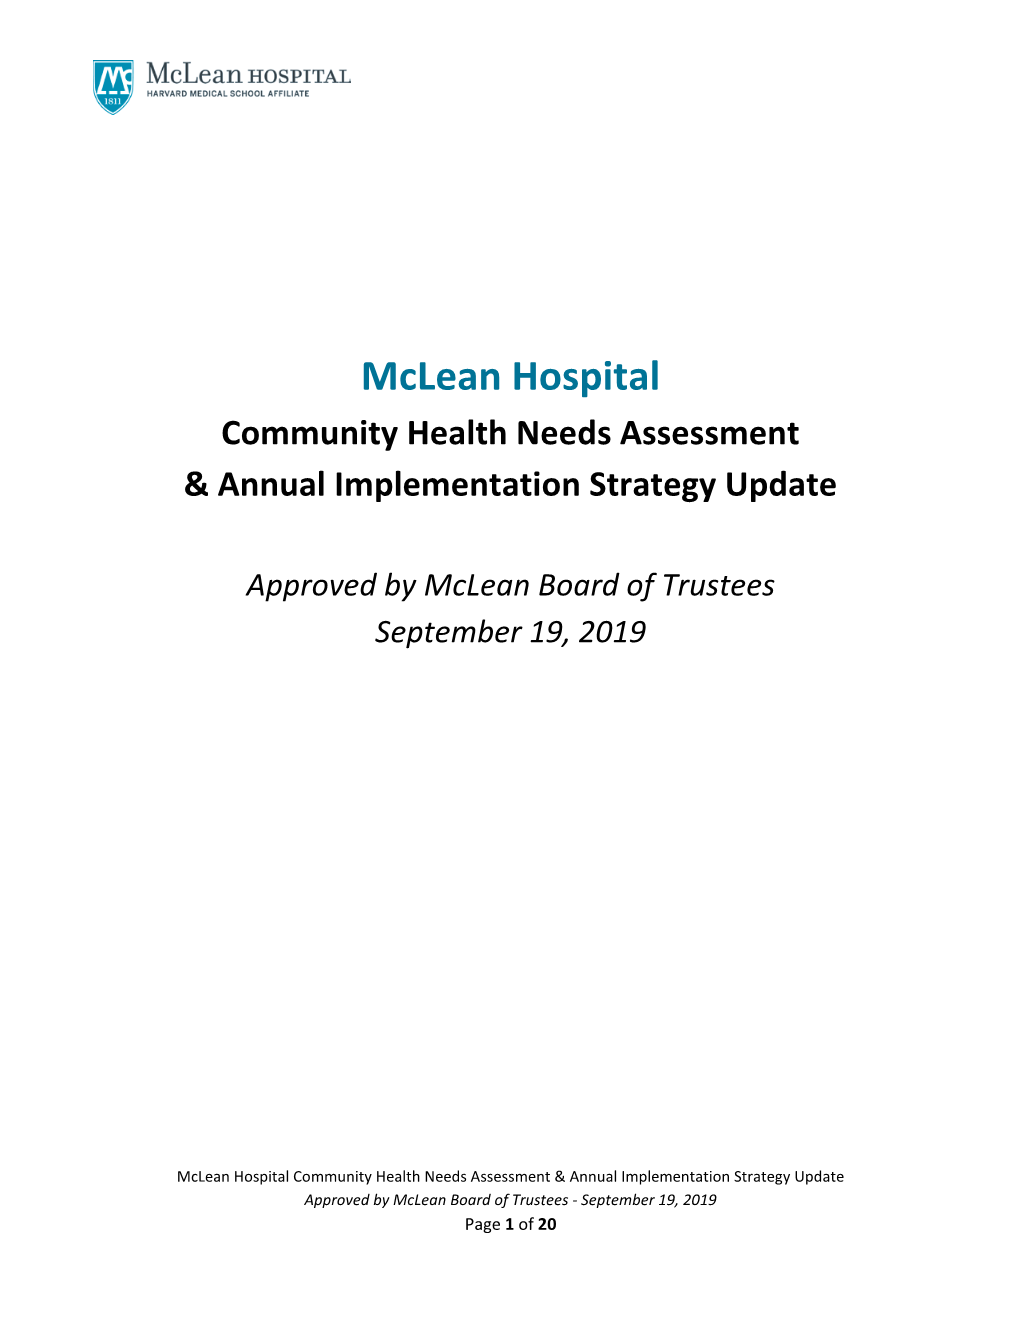 Community Health Needs Assessment & Annual Implementation Strategy Update 2019